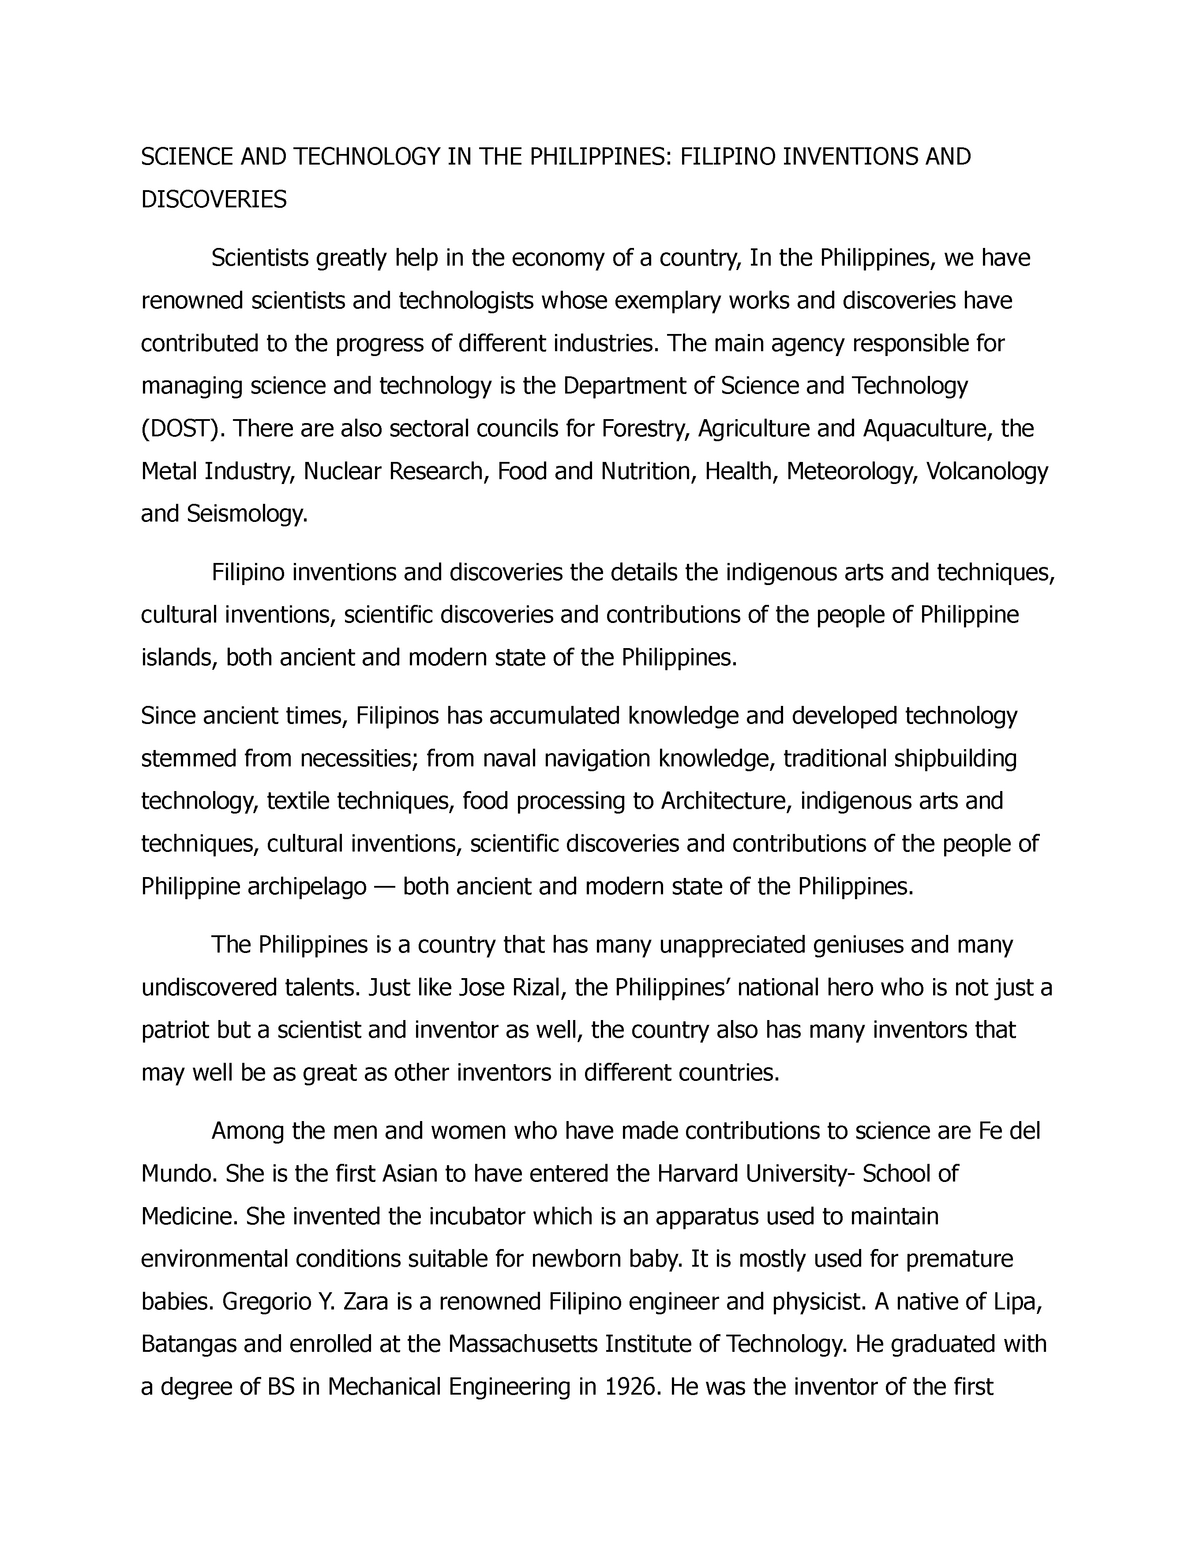 science and technology in the philippines essay